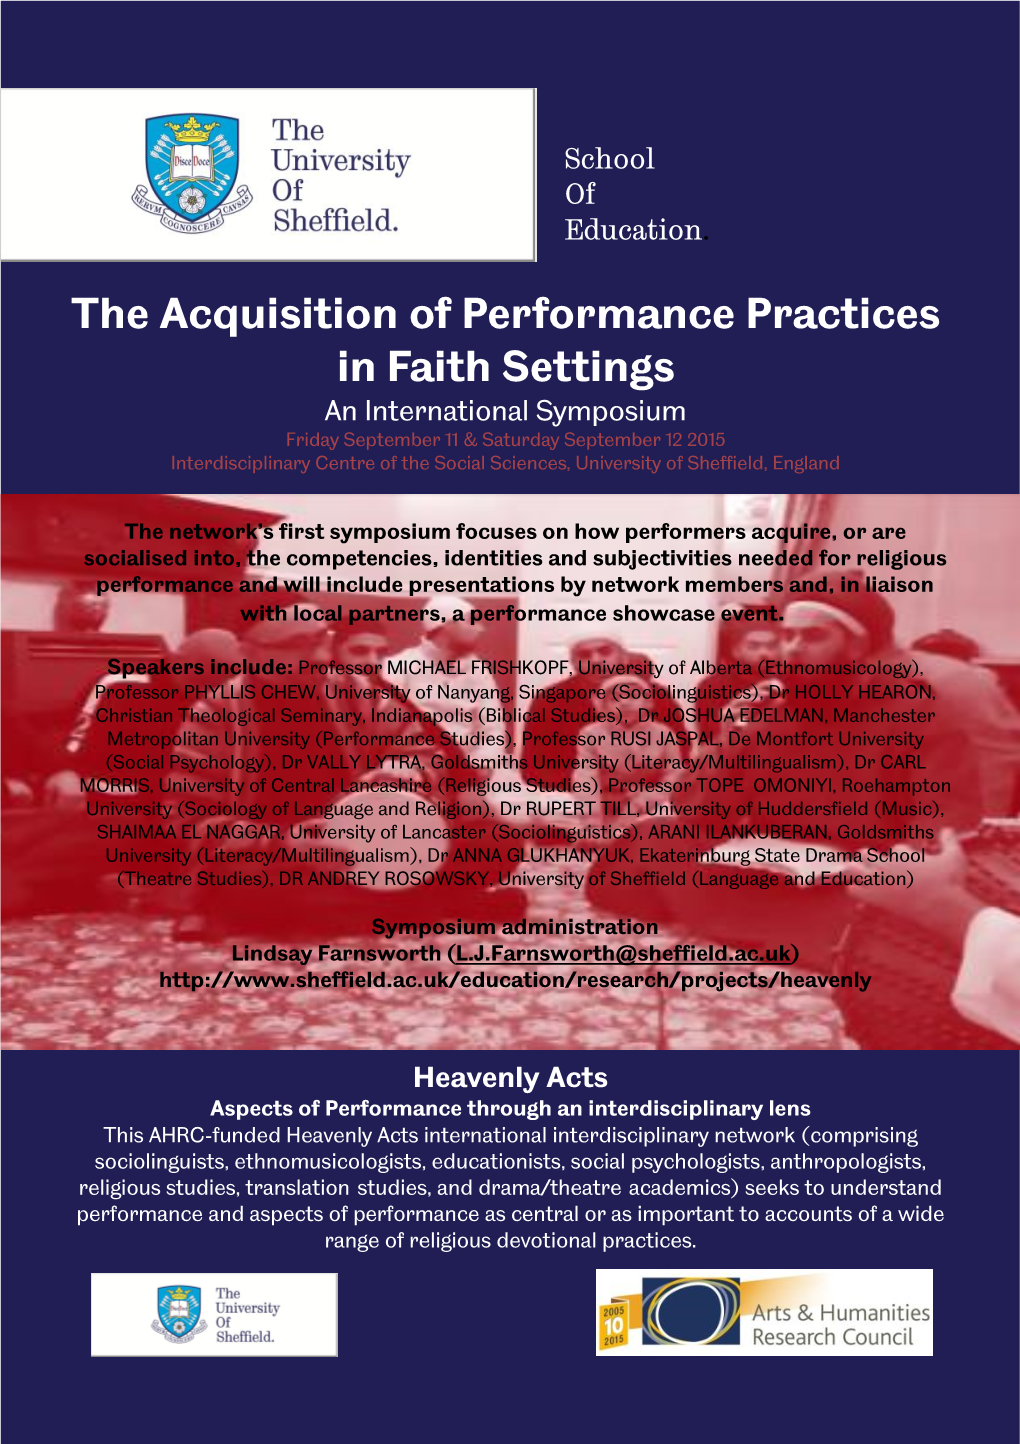 The Acquisition of Performance Practices in Faith Settings